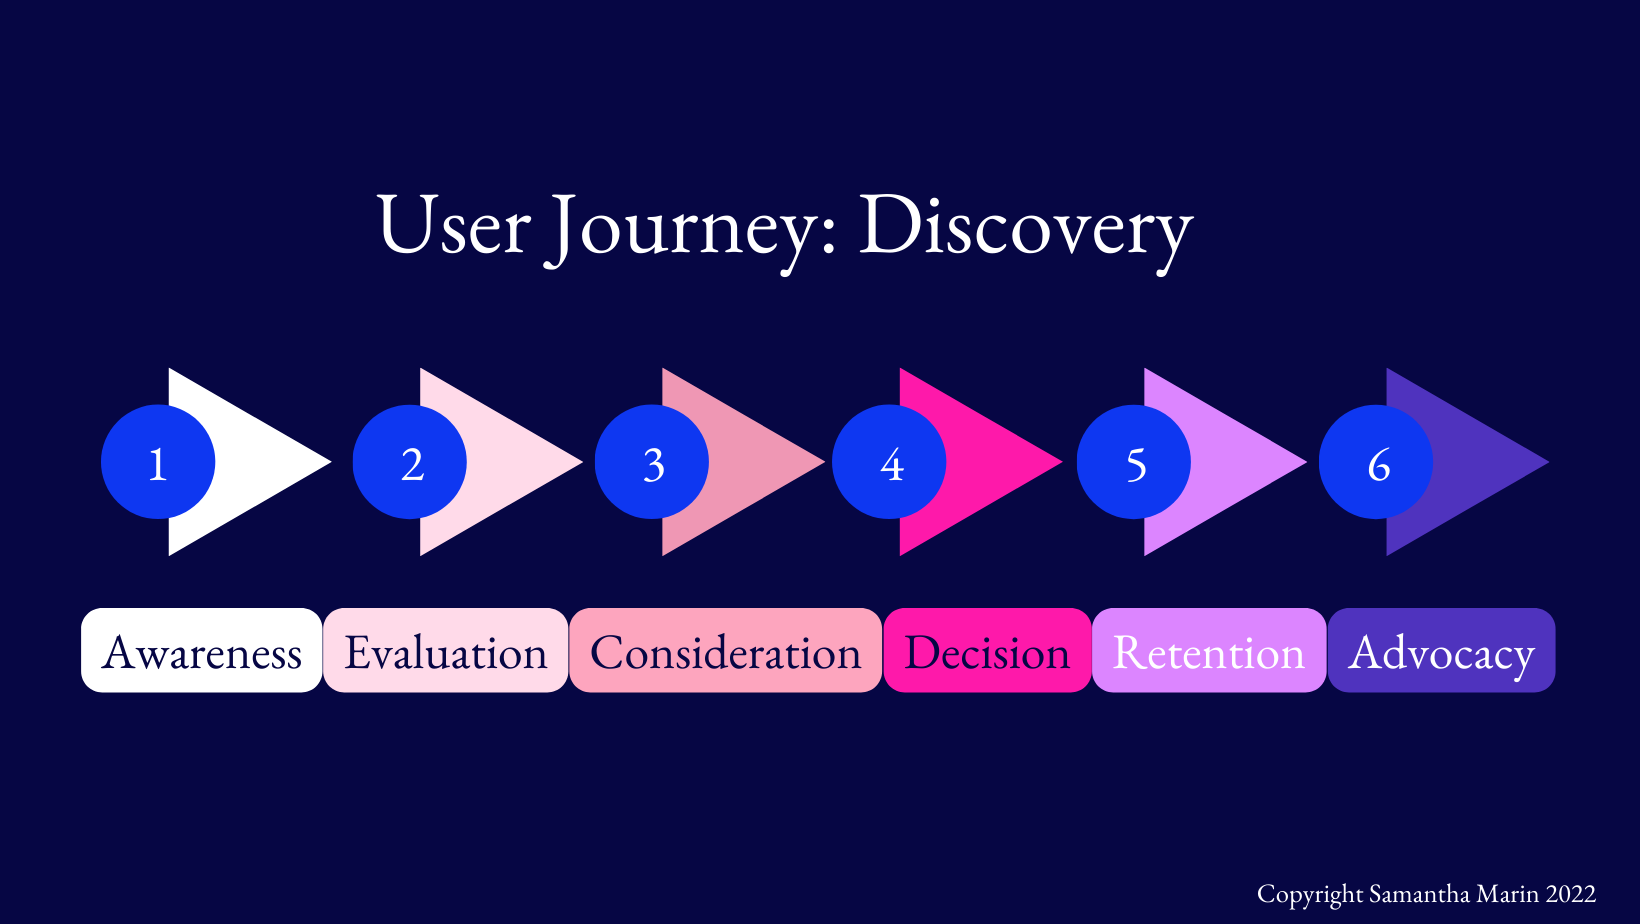 The 6-step user journey to discover a new product or service.